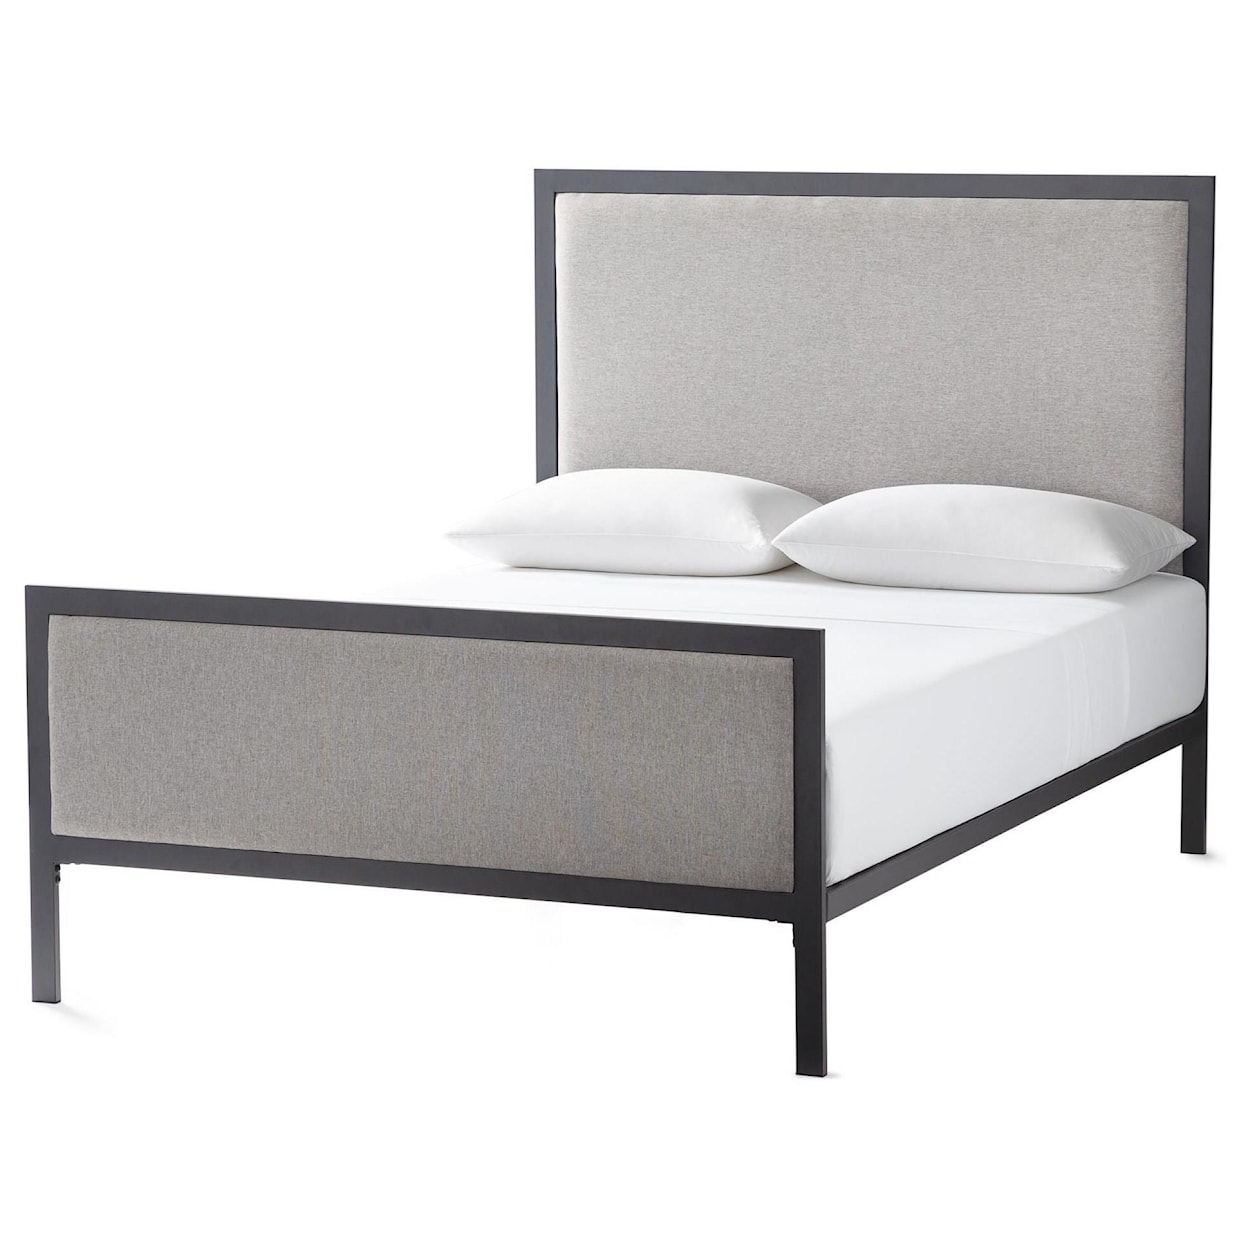 Malouf Clarke East King bed and East King Mattress